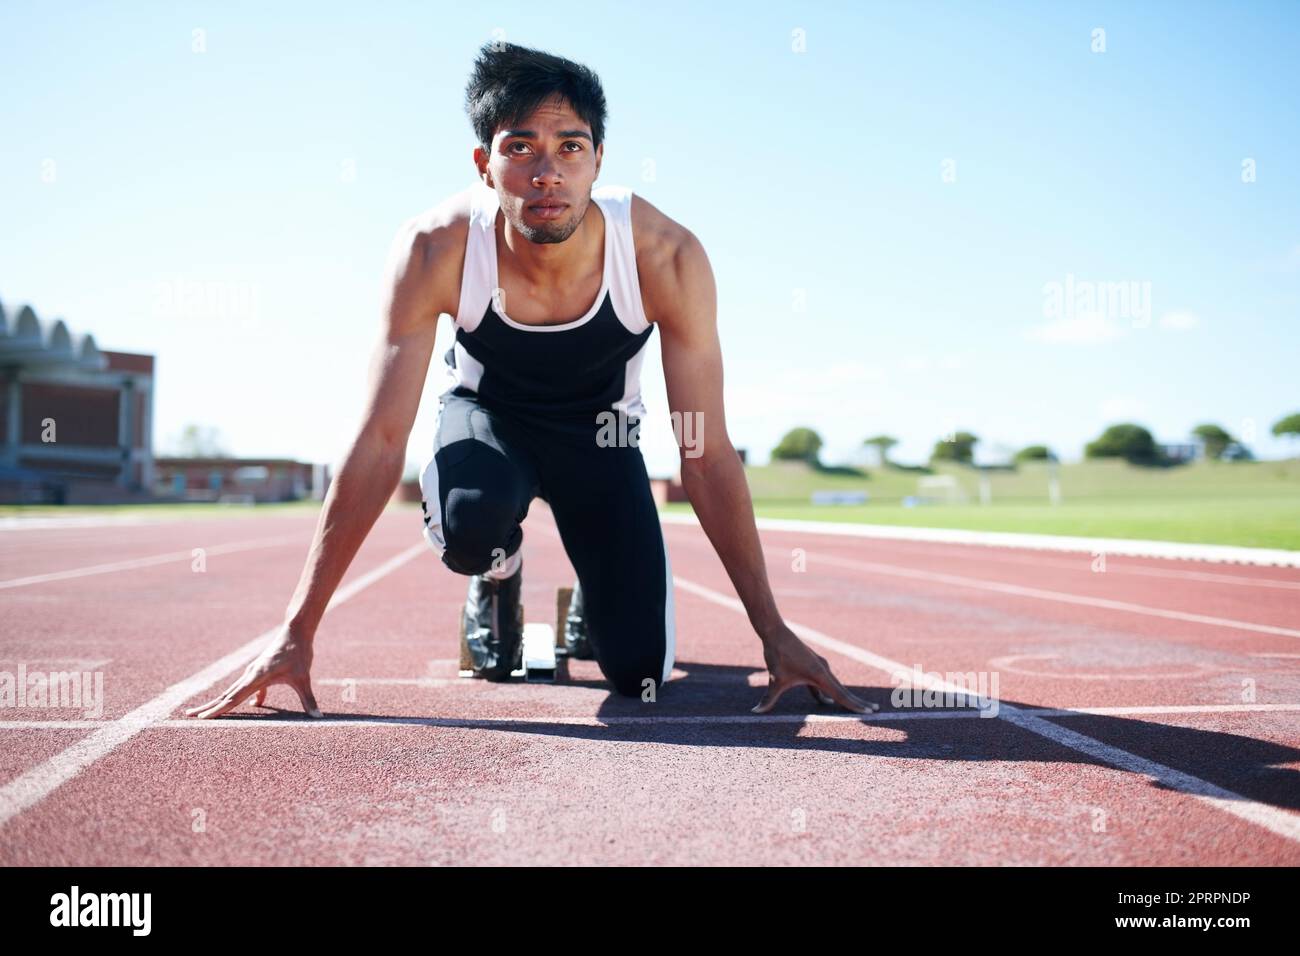 Hes got a one-track mind. A young sprinter focussing on his goals. Stock Photo